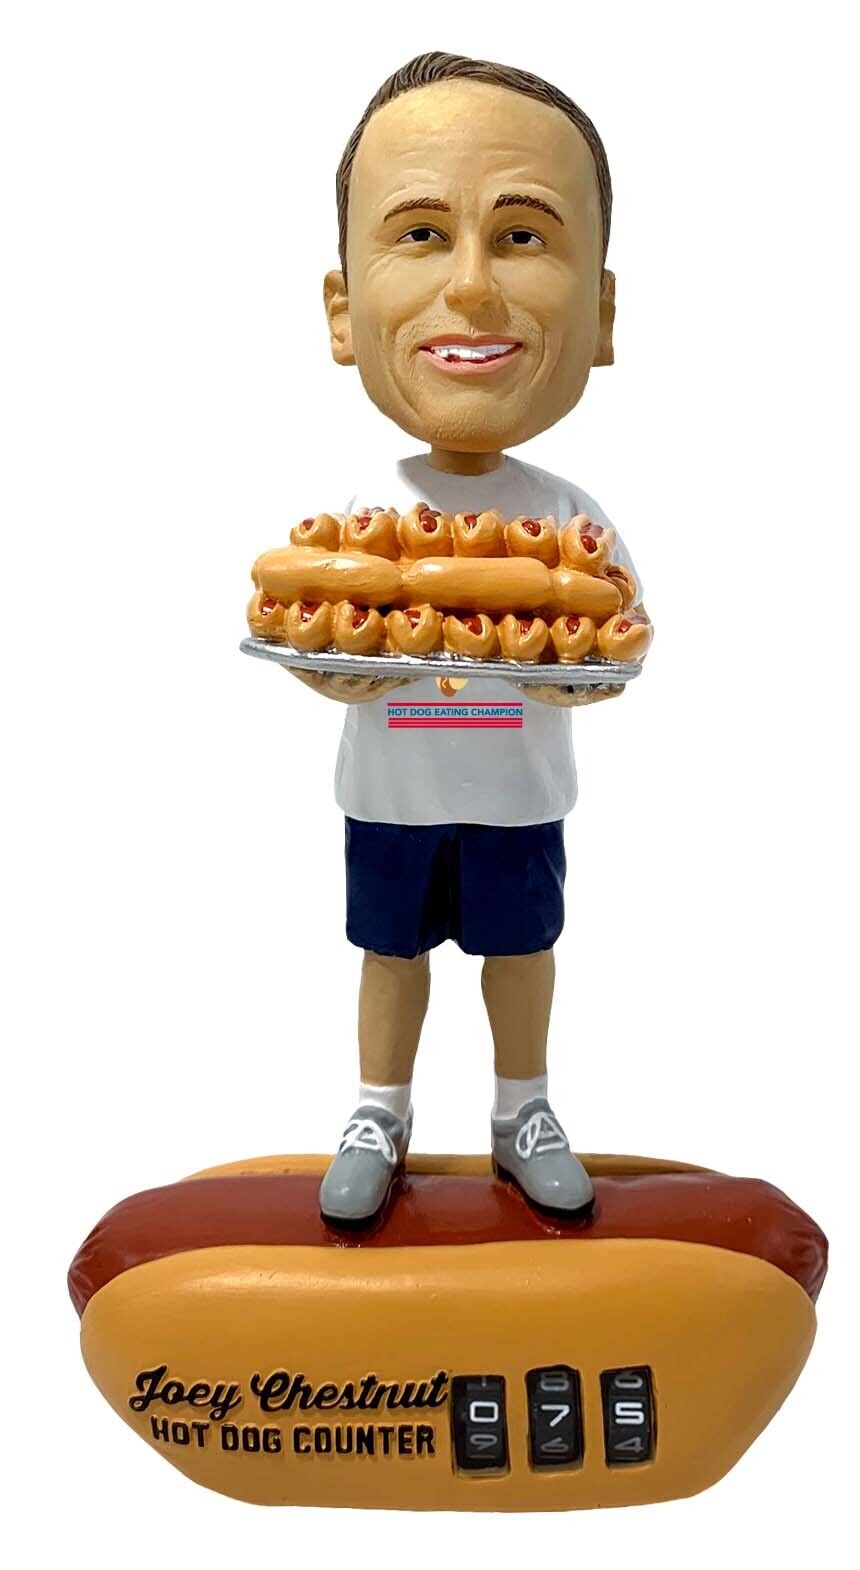 Joey Chestnut Hot Dog Counter Bobblehead Hot Dogs Eating Contest Champion